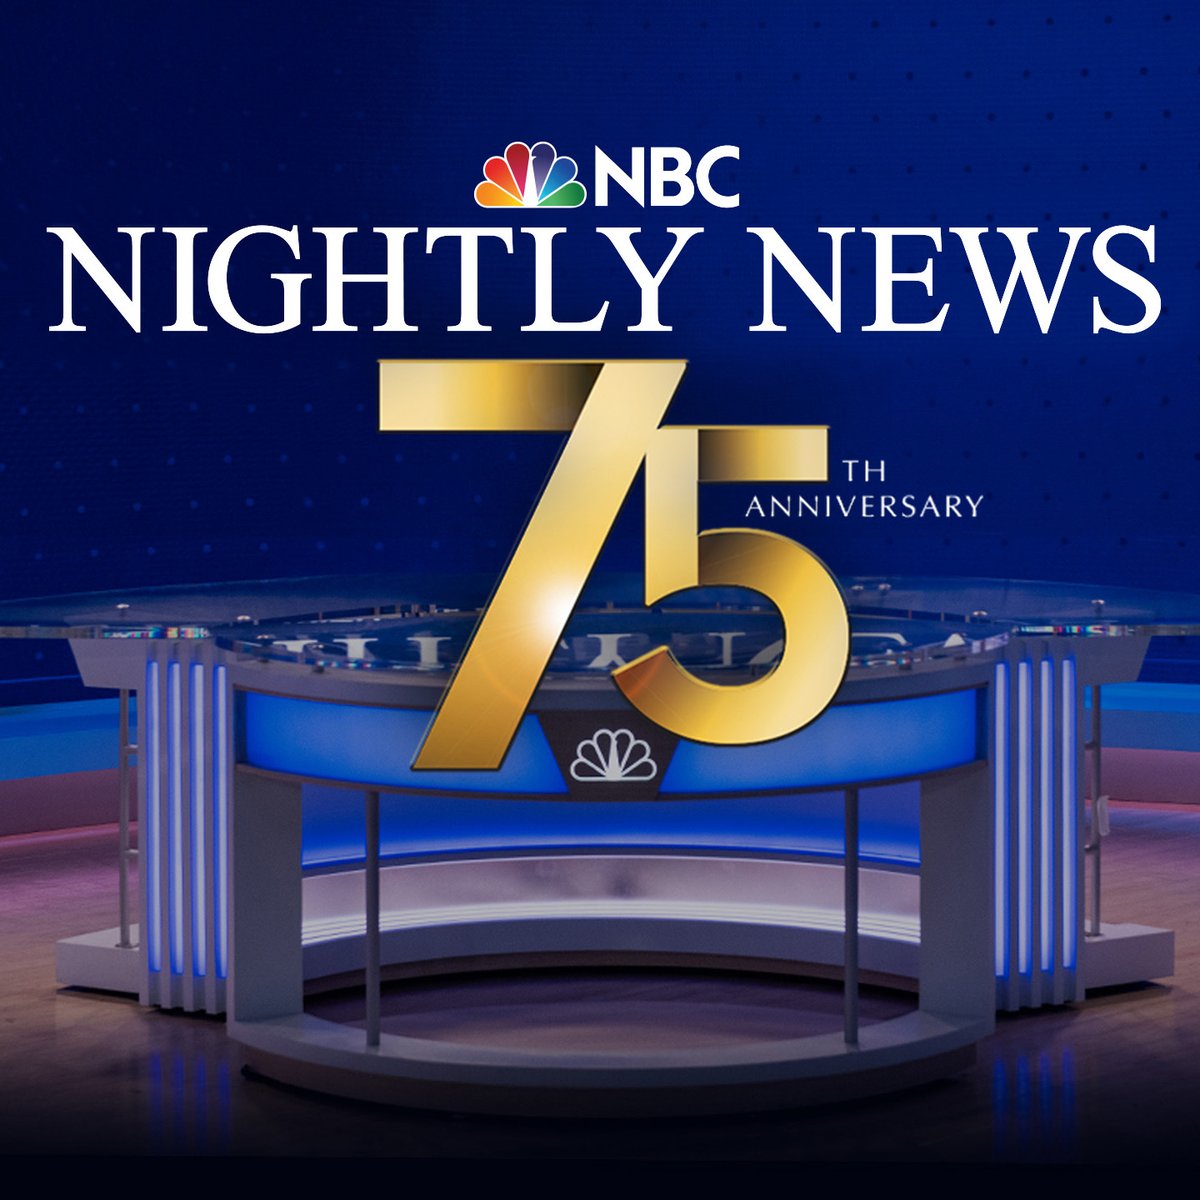 TONIGHT: We’re celebrating 75 years of NBC Nightly News.

NBC launched its evening news program in 1948, growing into the broadcast anchored by @LesterHoltNBC that you know and trust today.

Join us tonight as we commemorate this major milestone. #NightlyNews75